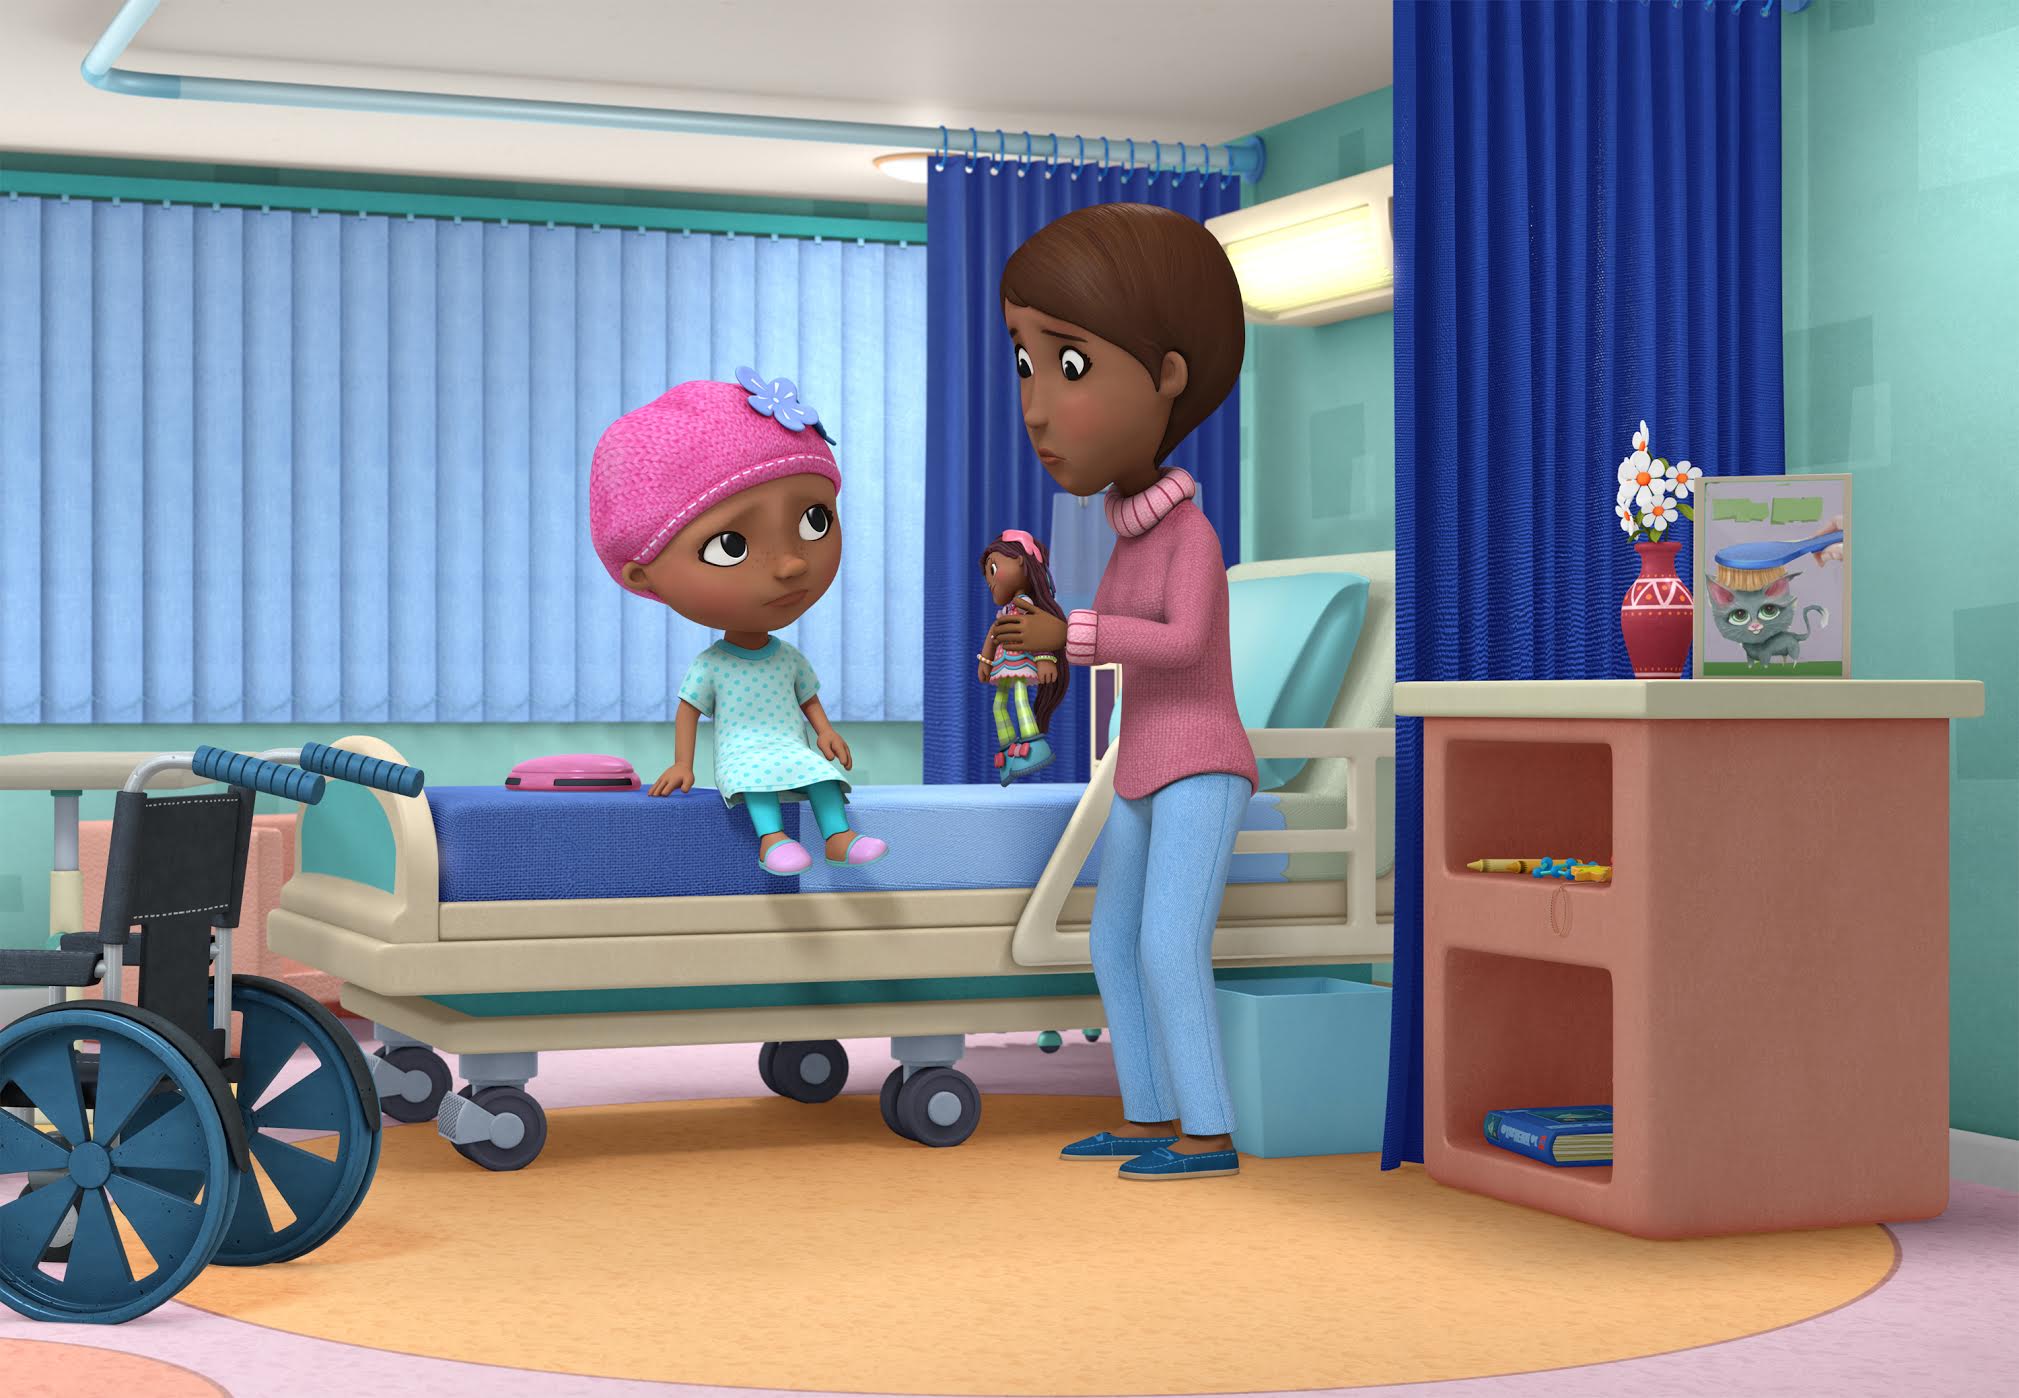 Robin Roberts Guest Stars in a Special Episode of Disney Junior’s ‘Doc McStuffins,’ Premiering on National Cancer Survivors Day, Sunday, June 4